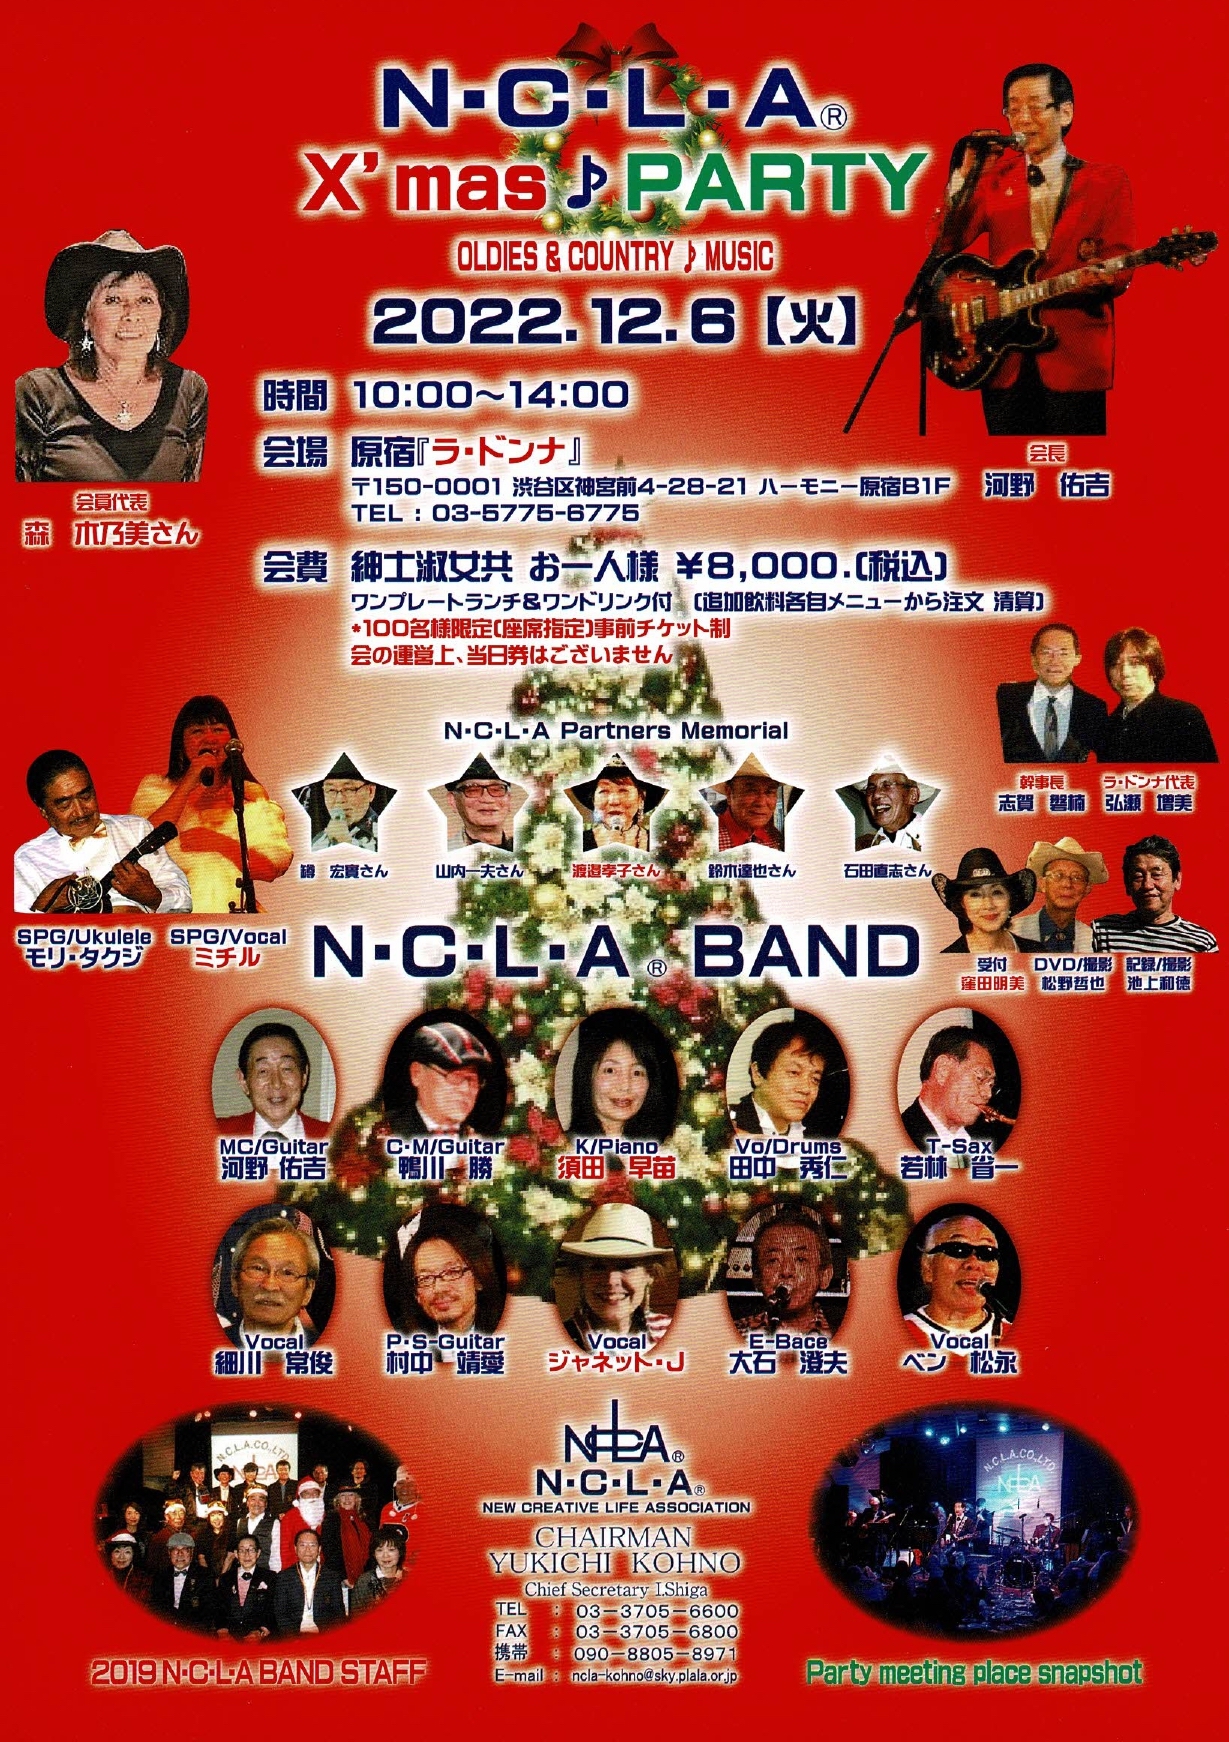 NCLA X’mas♪PARTY OLDIES&COUNTRY ♪ MUSIC